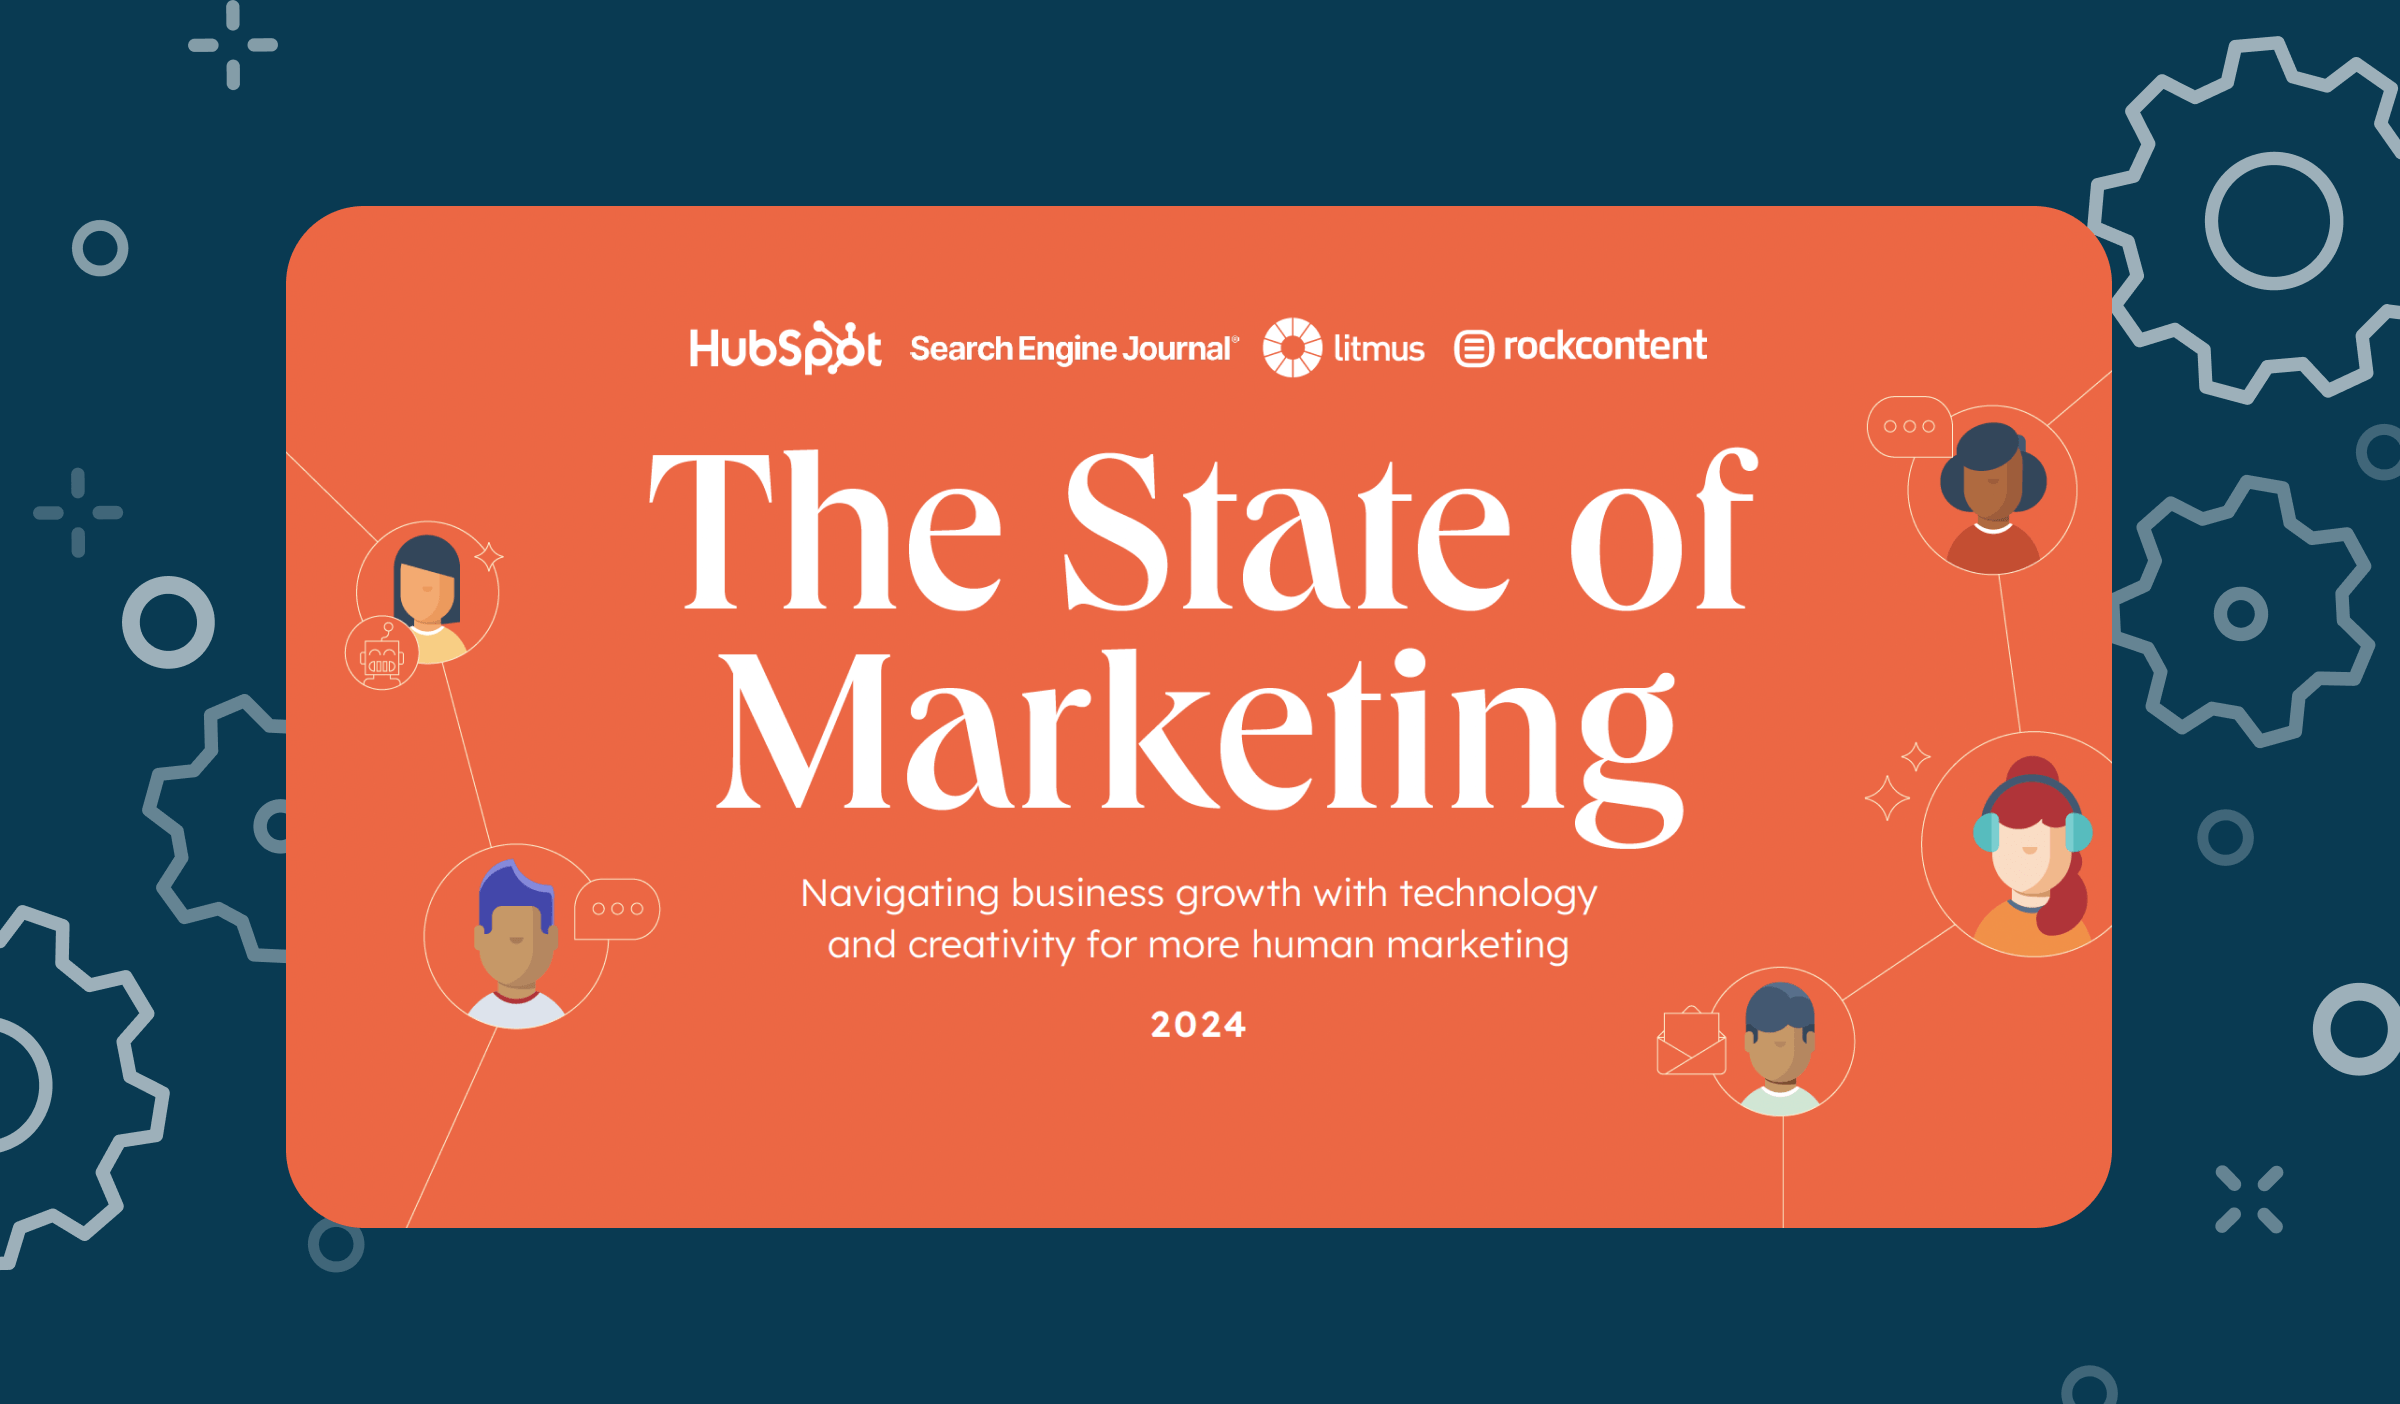 The State of Marketing by HubSpot, Search Engine Journal, Litmus, and Rock Content. Navigating business growth with technology and creativity for more human marketing in 2024.